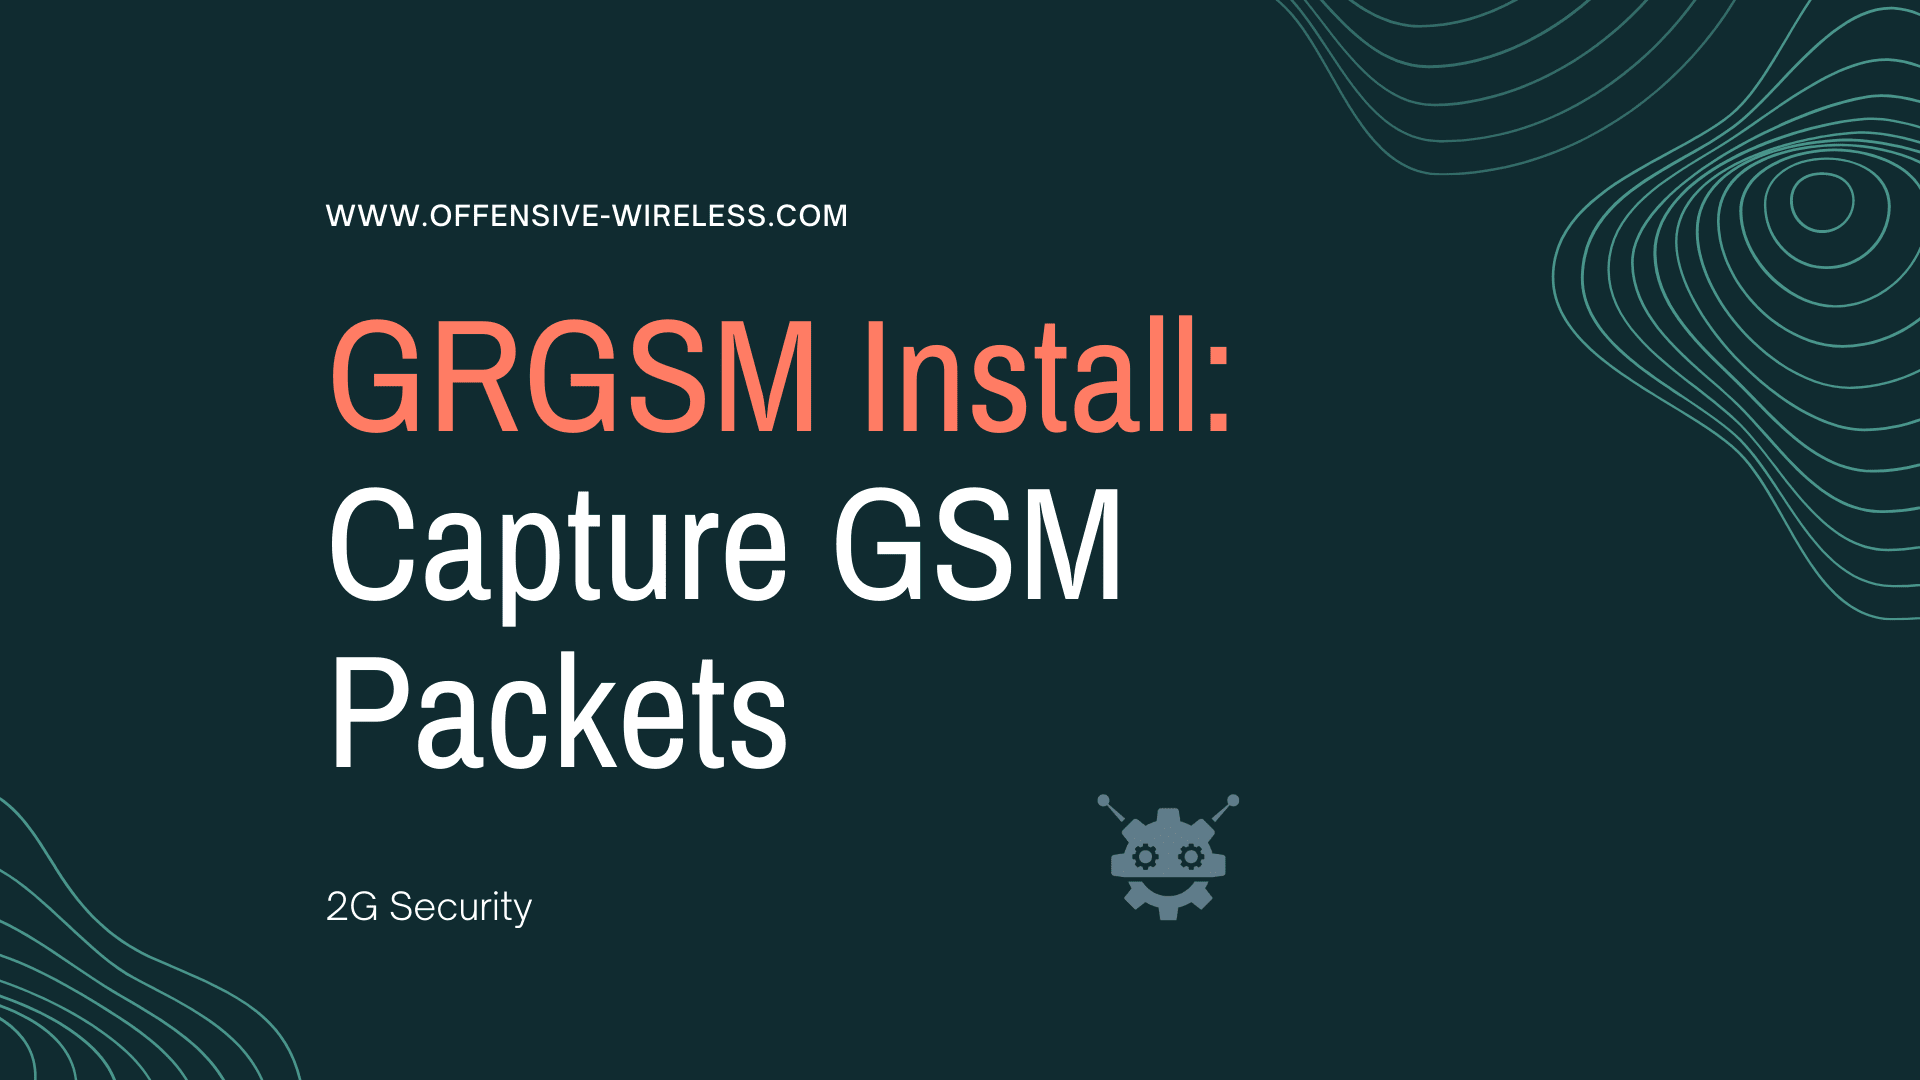 GRGSM Install How to capture GSM packets